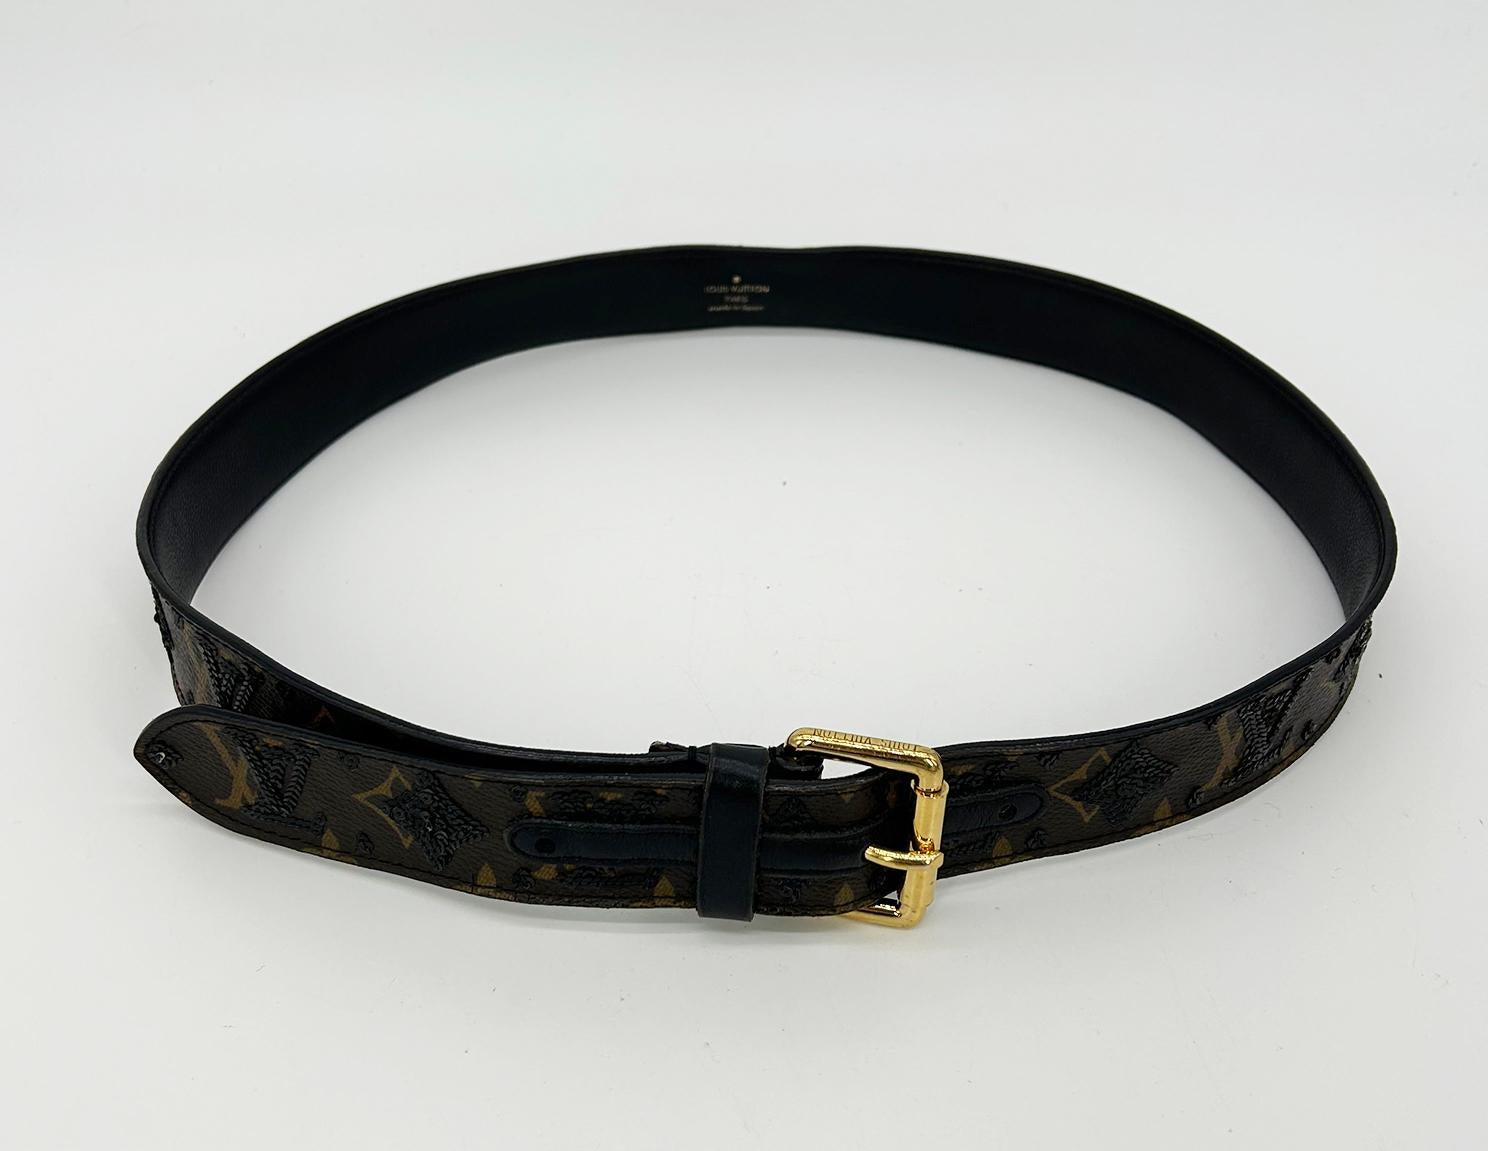 Limited Edition Louis Vuitton Monogram Sequin Eclipse Belt In Excellent Condition For Sale In Philadelphia, PA